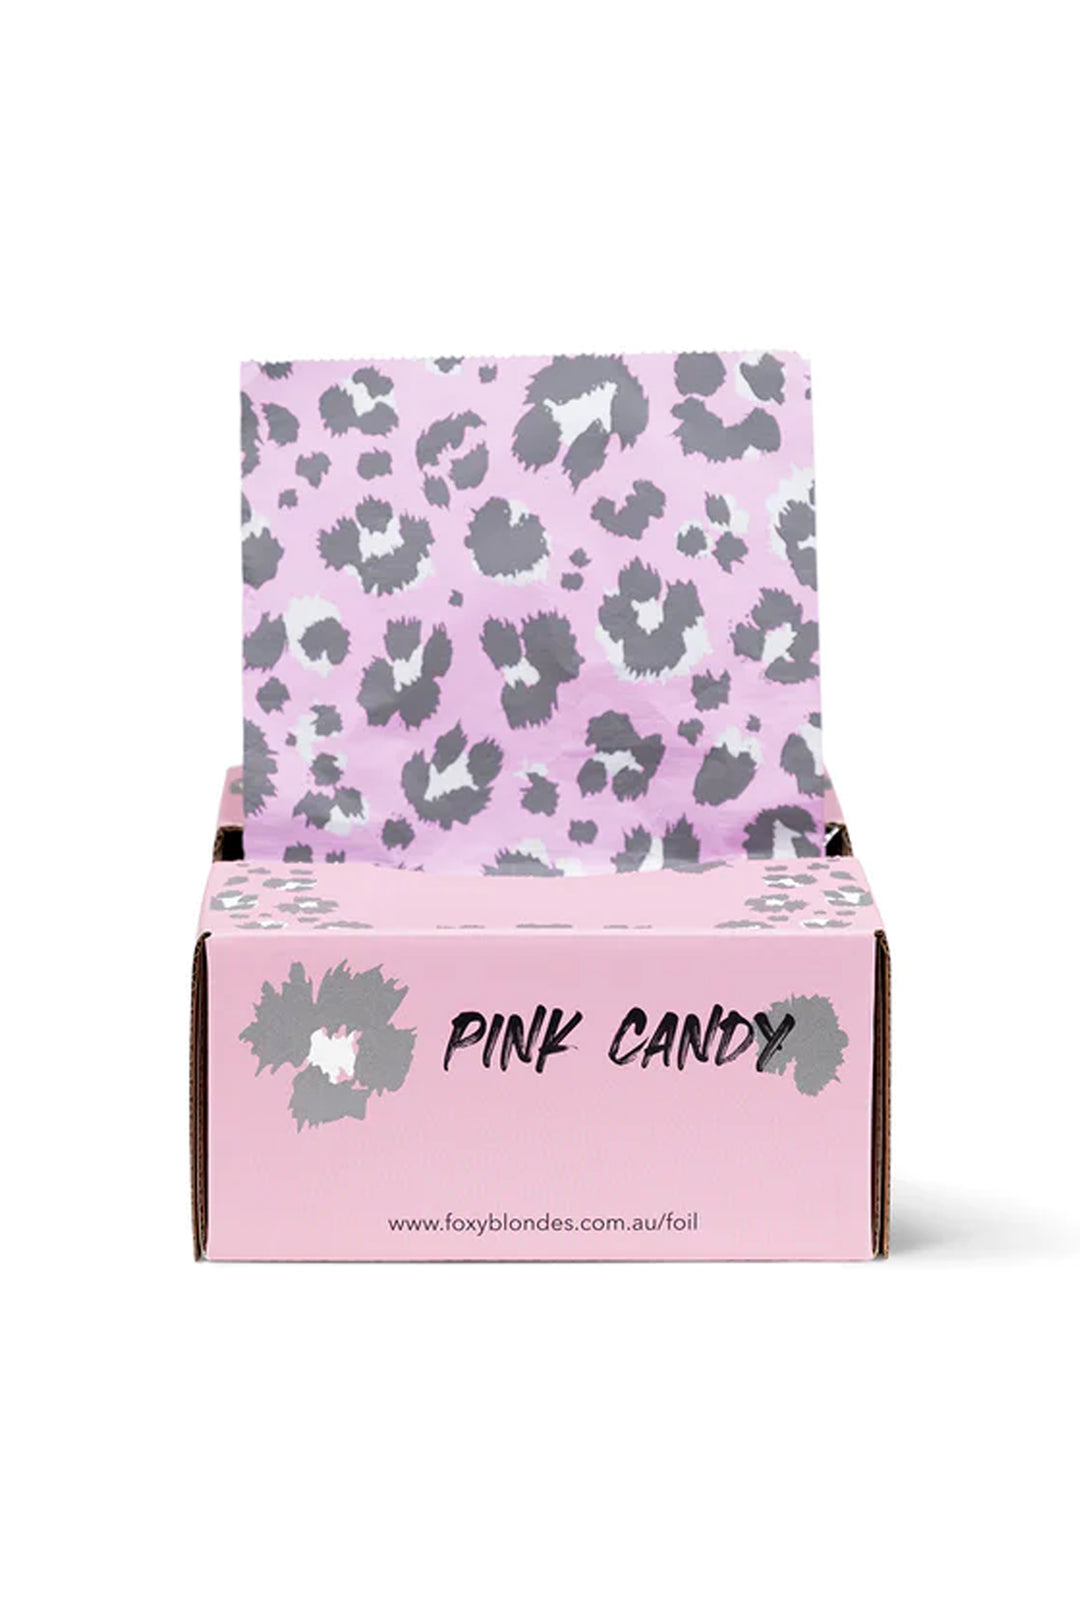 FOXY BLONDES FOIL GLOSS PINK CANDY 27CM 500 SHEETS - POP UP